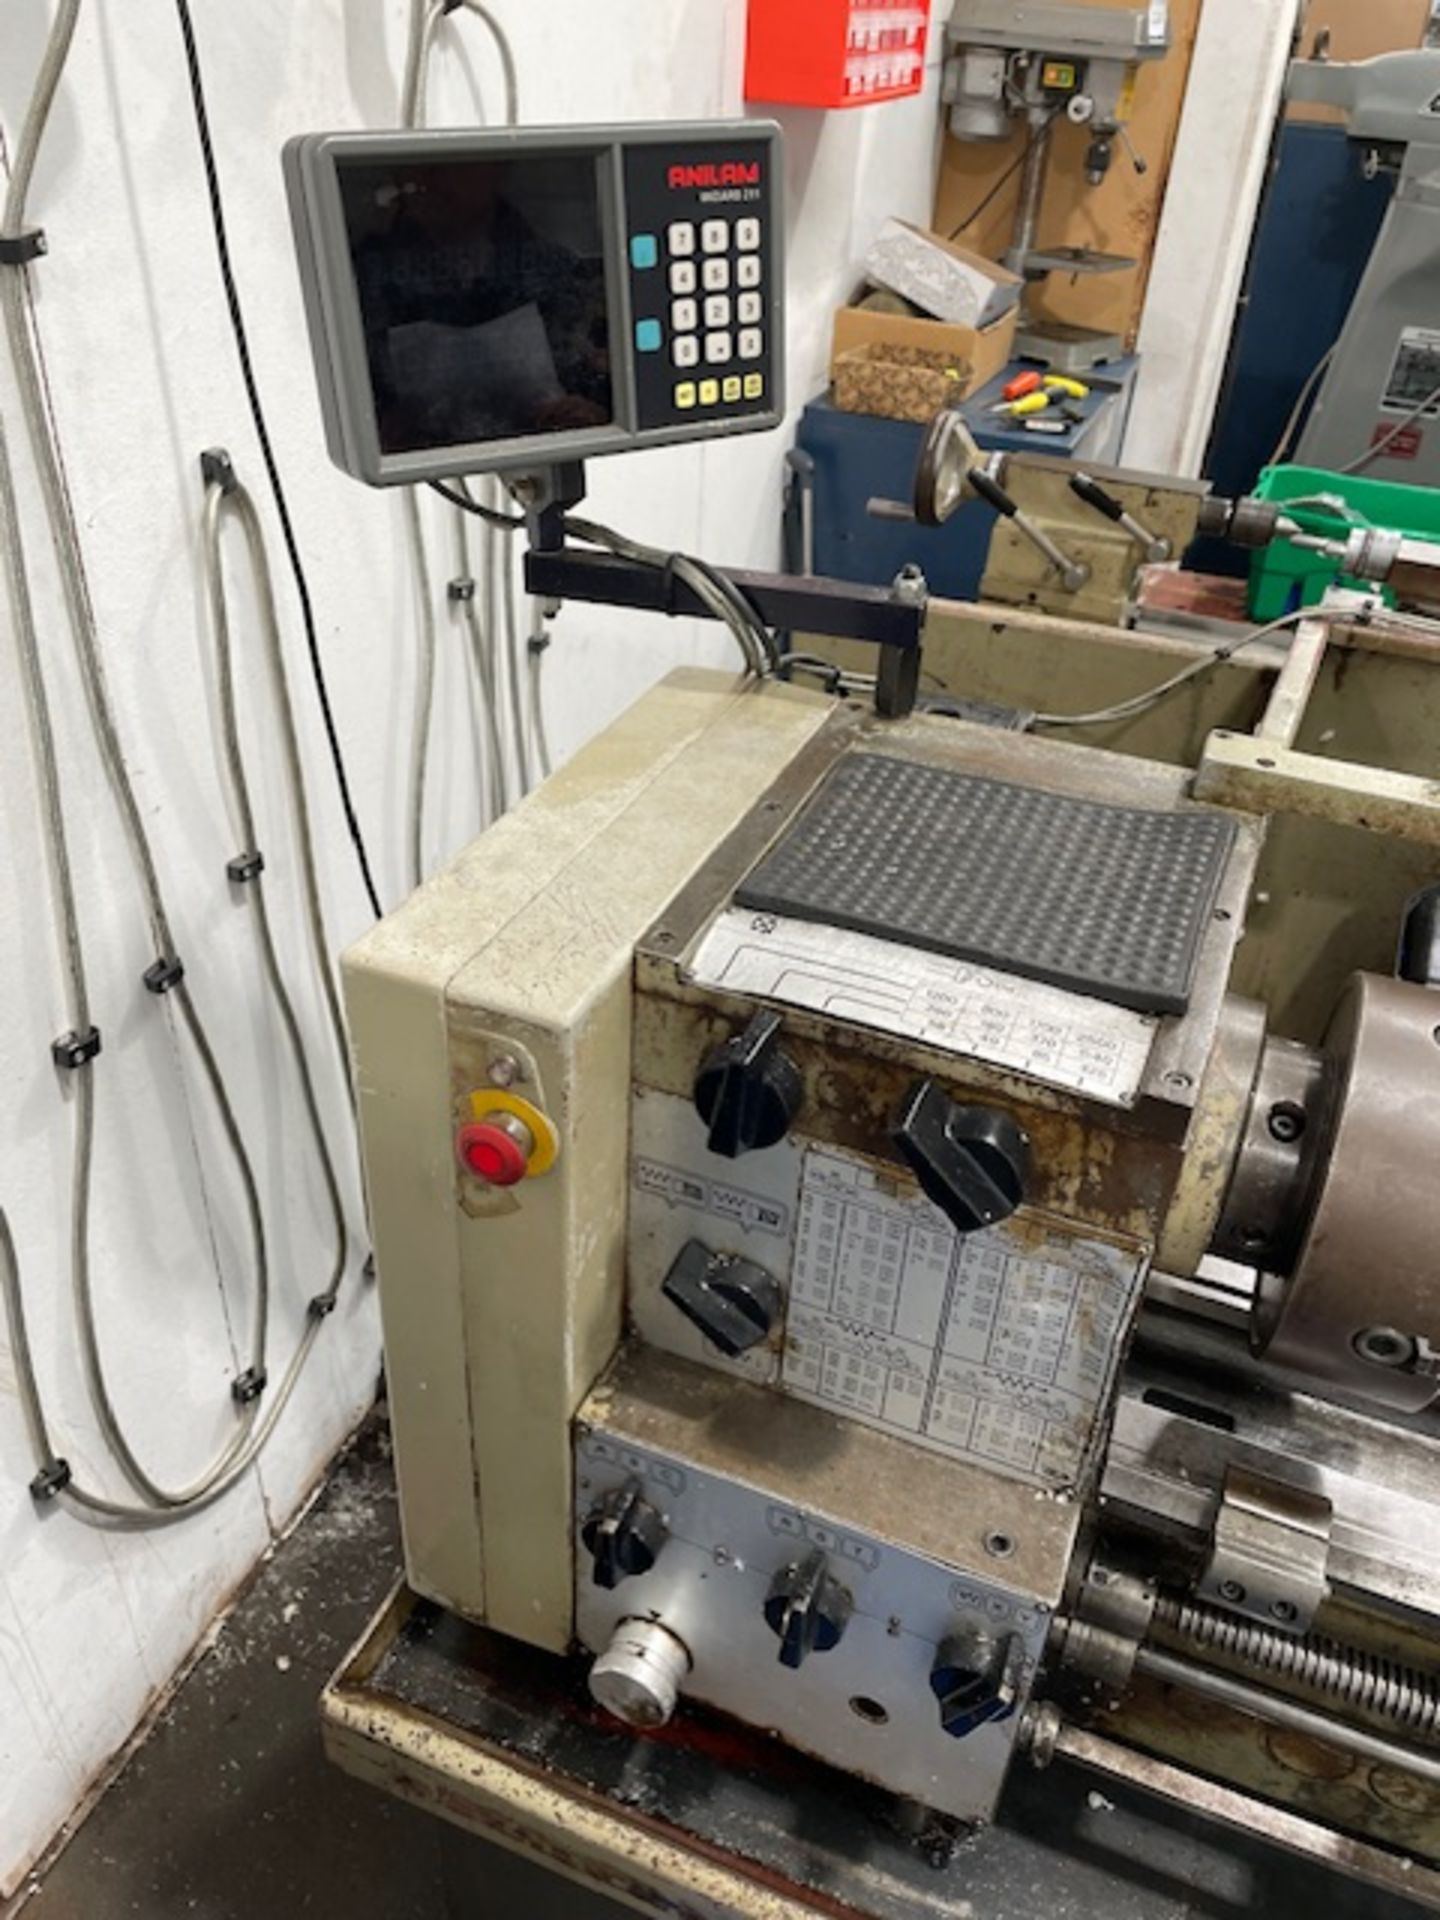 Harrison M300 Centre Lathe, Machine Number 307280 with DRO, Fitted 3 Jaw Chuck and with Range of - Image 3 of 4